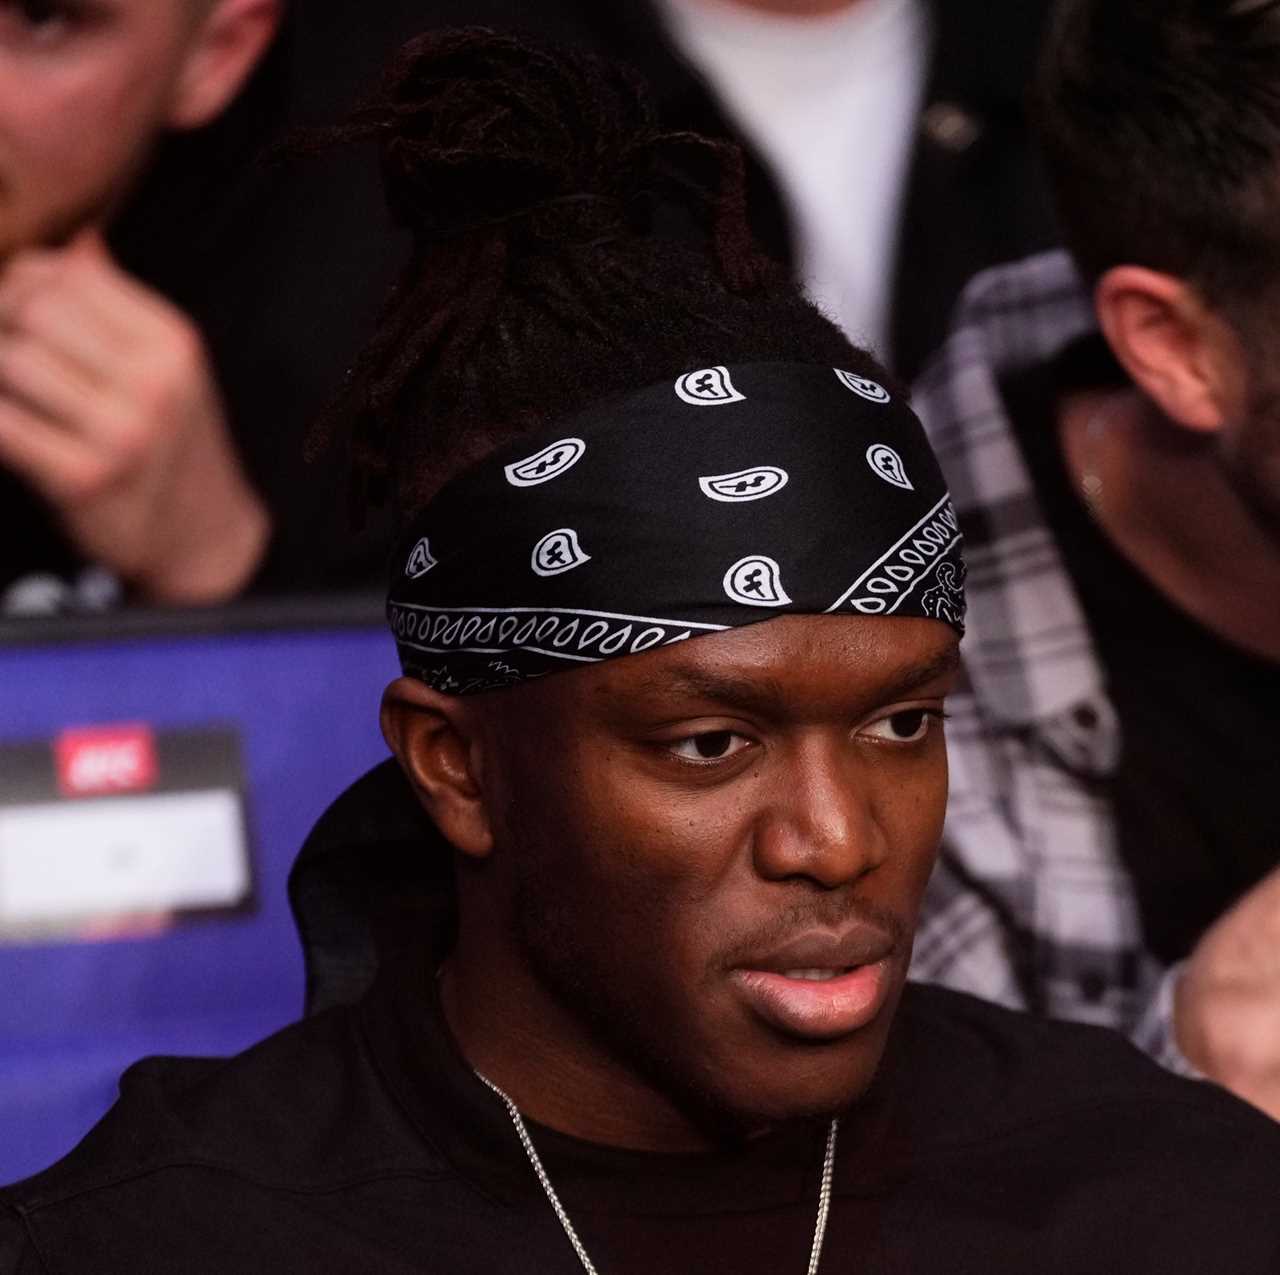 After using racial slur, KSI was forced to apologise for the video and remove it from YouTube.